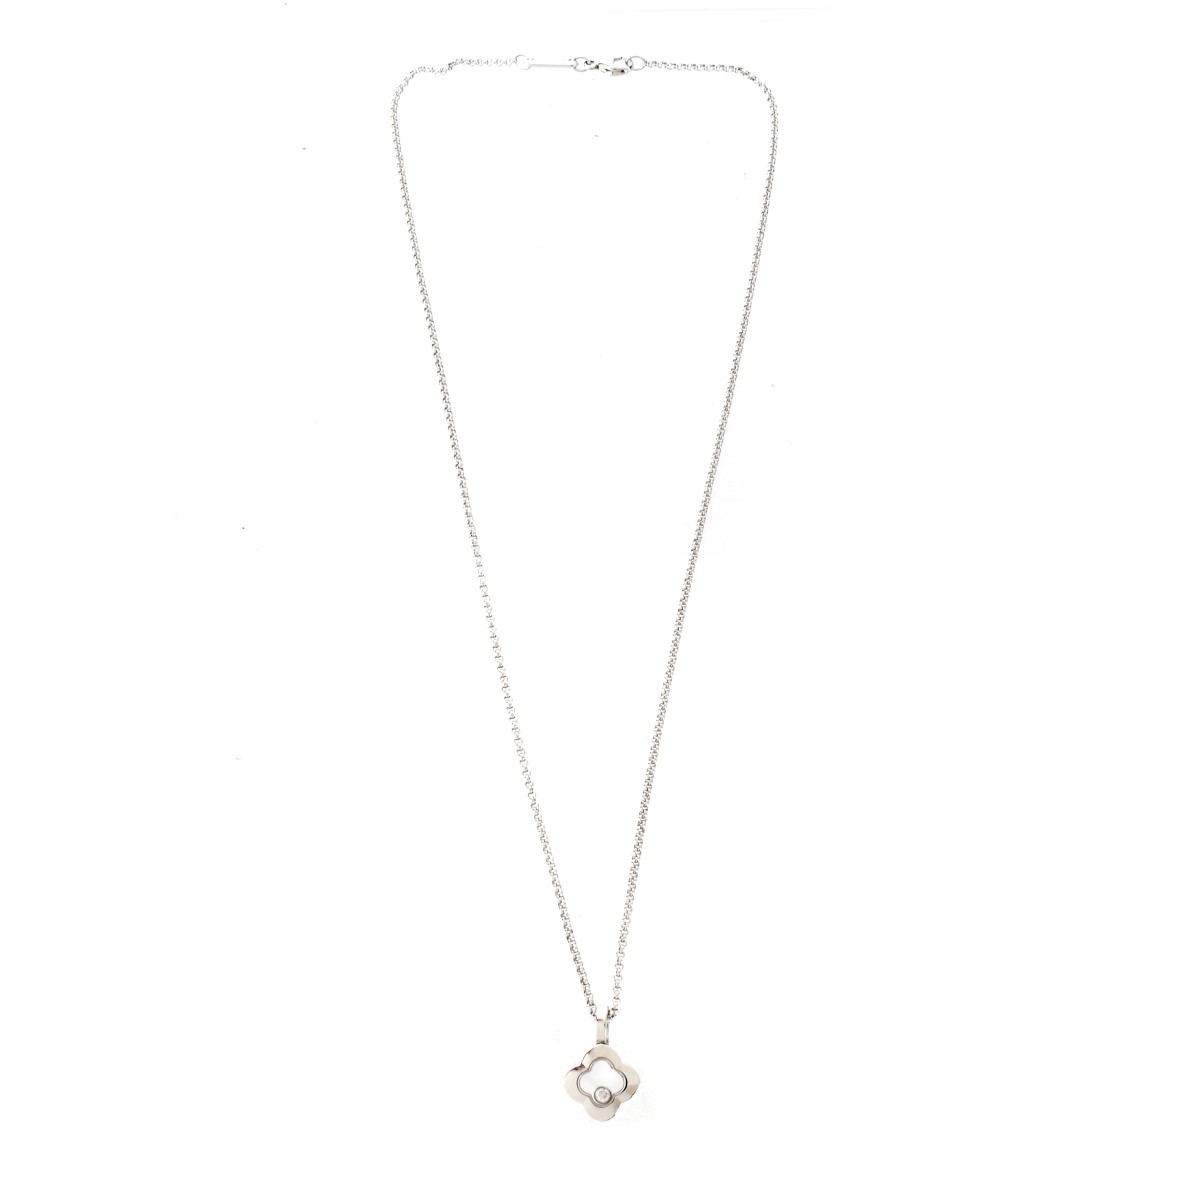 Chopard Diamond and 18K Necklace